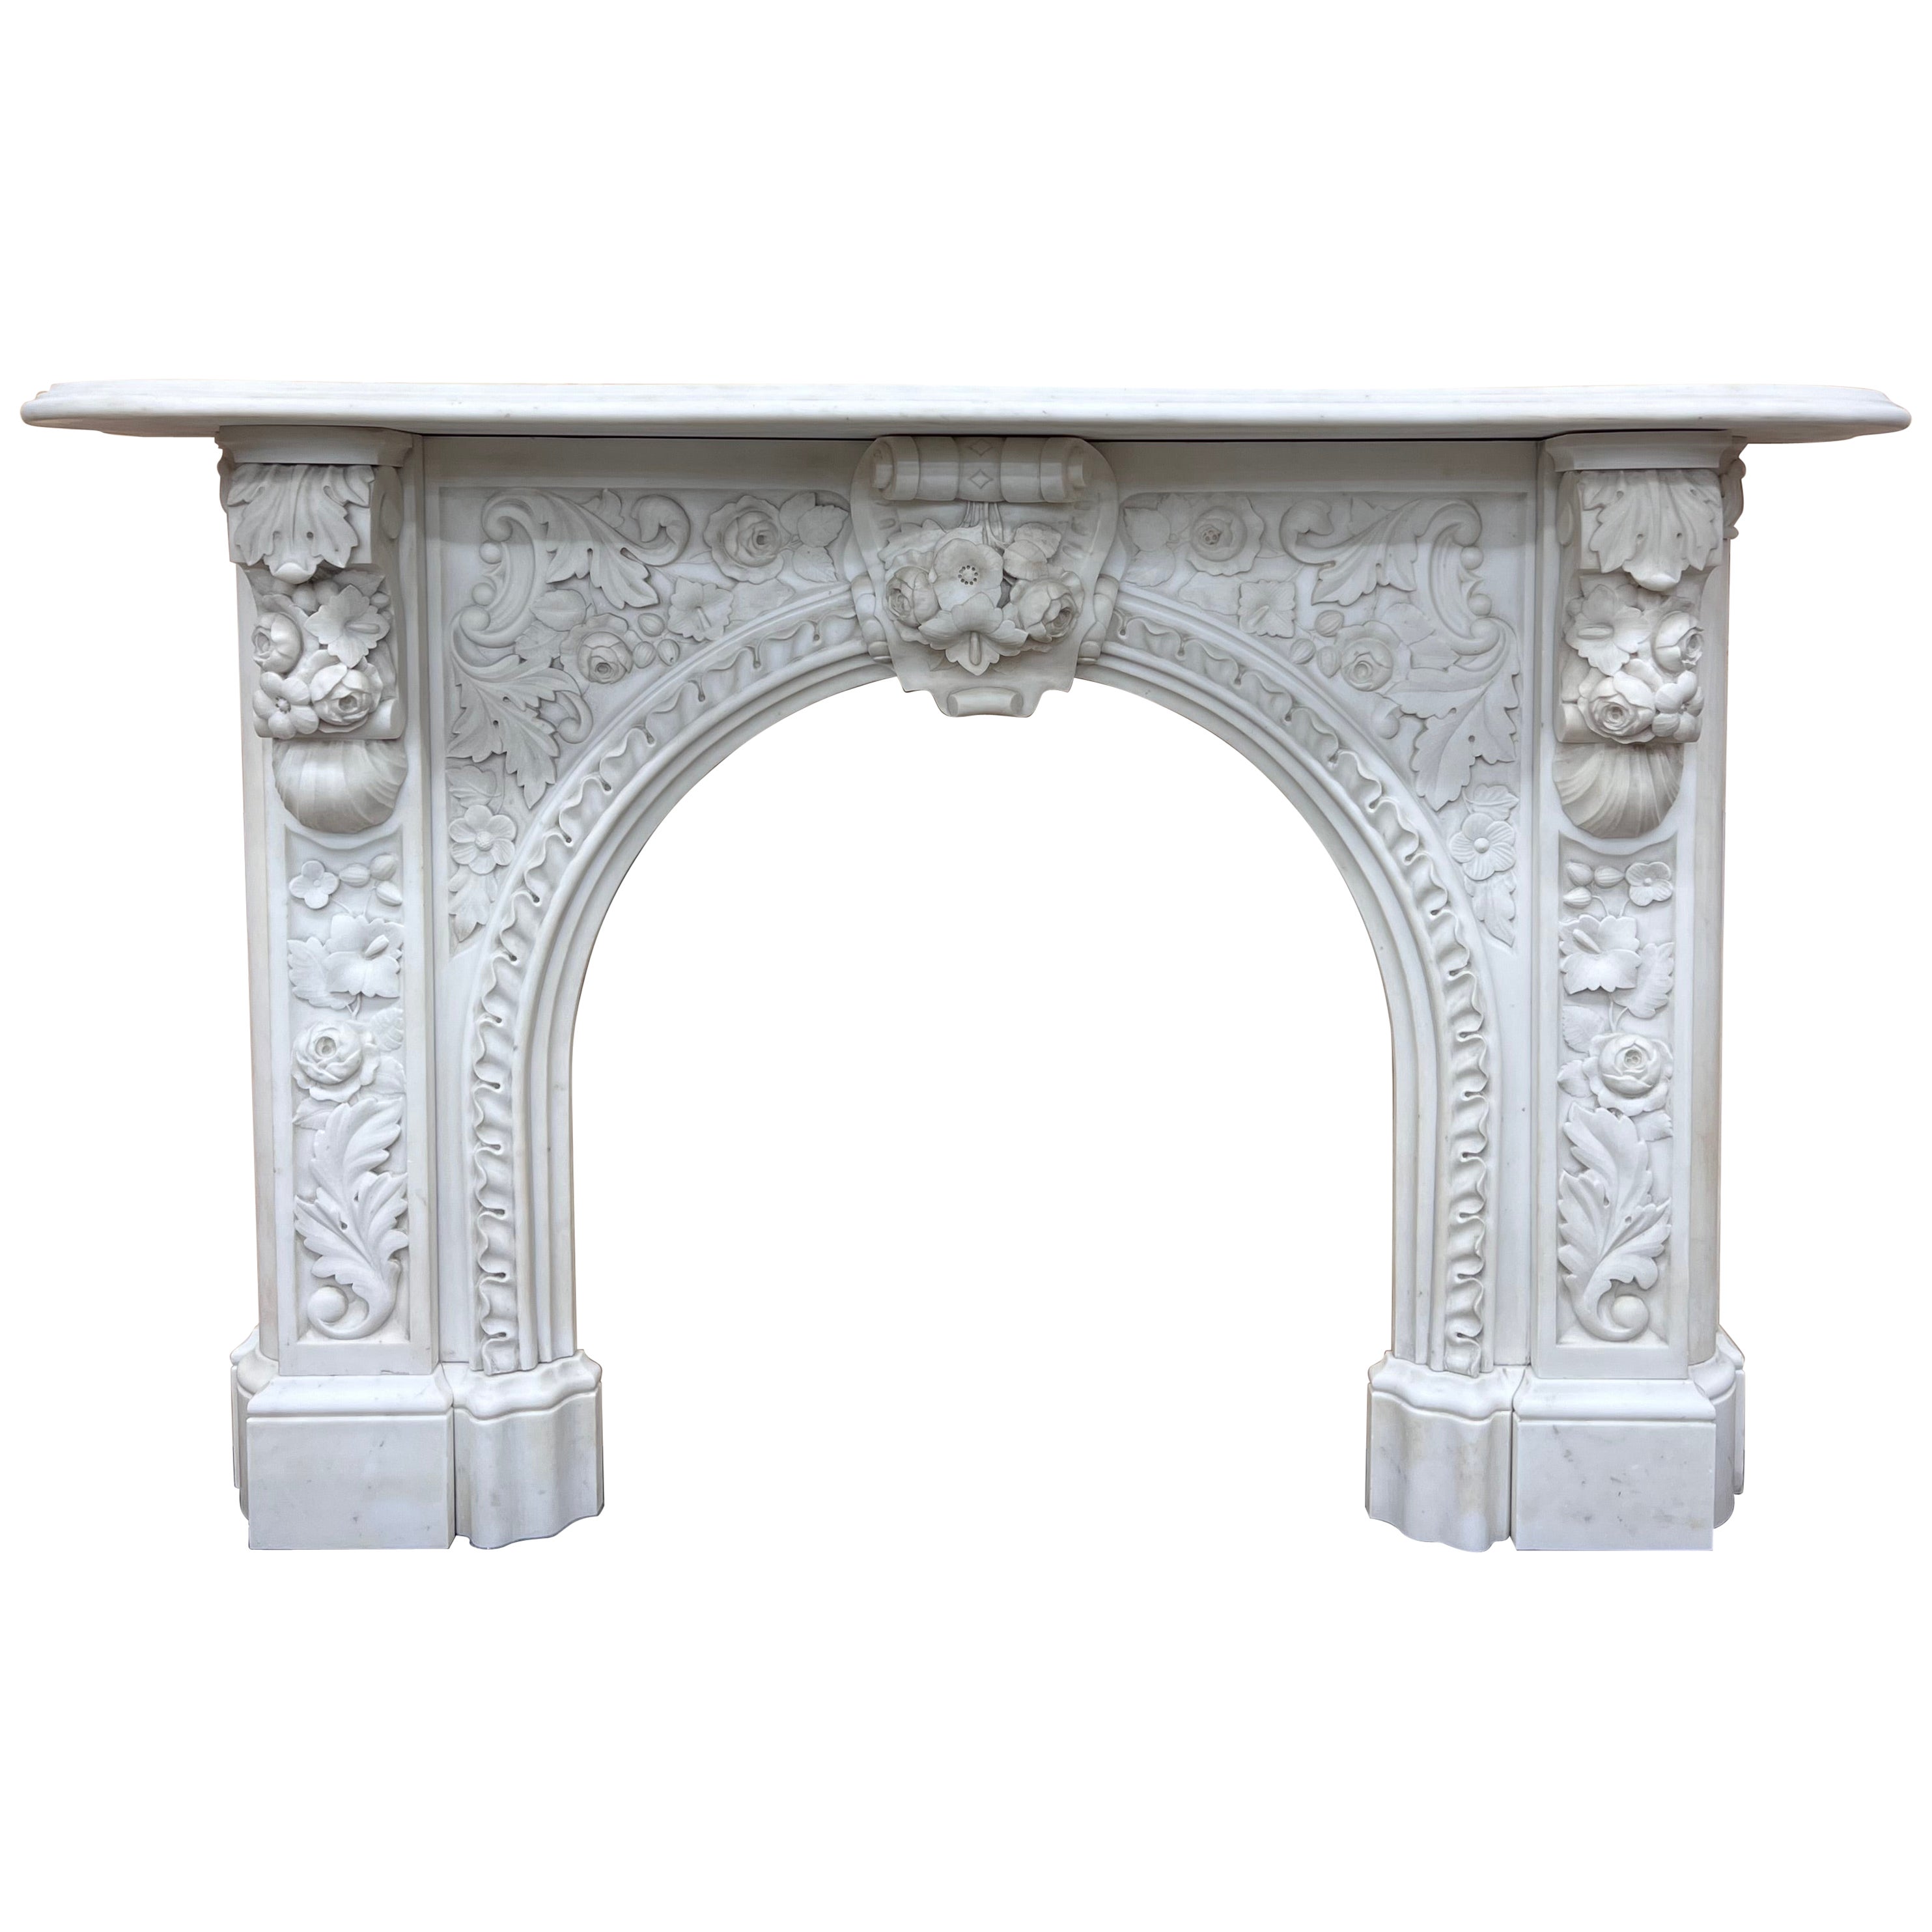 Arched Victorian Chimneypiece c. 1860 Carved in Statuary Marble For Sale